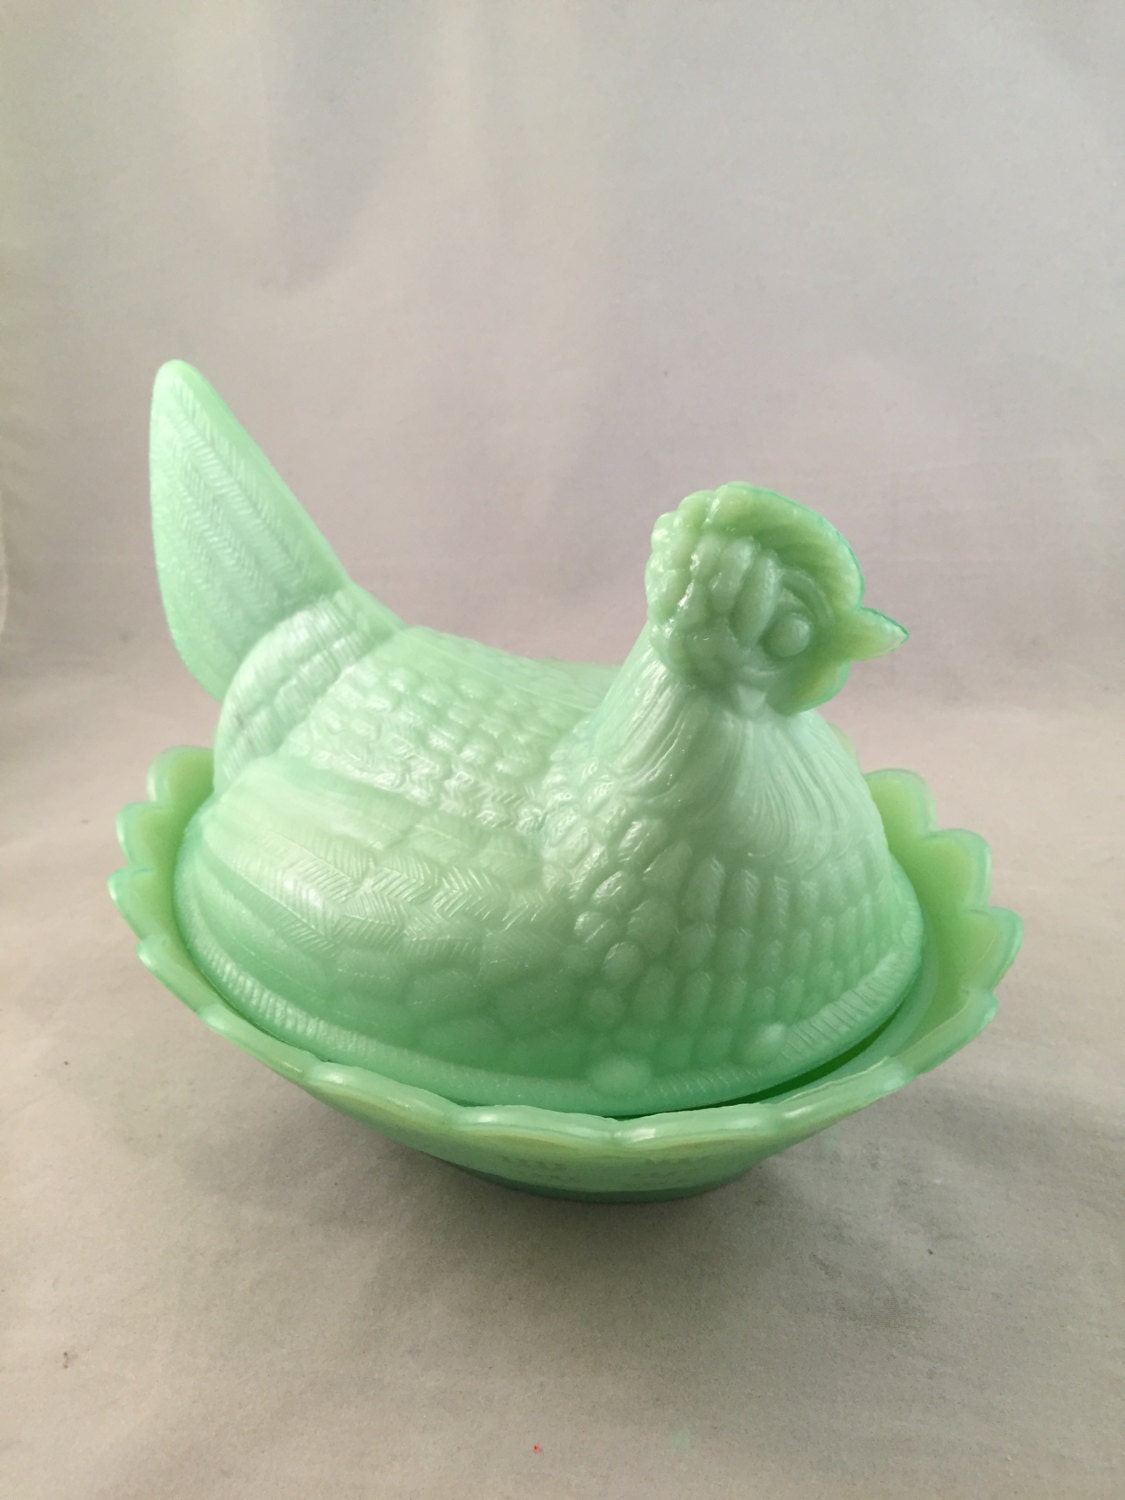 Vintage Jadeite Glass Nesting Hen Covered Dish Candy Dish